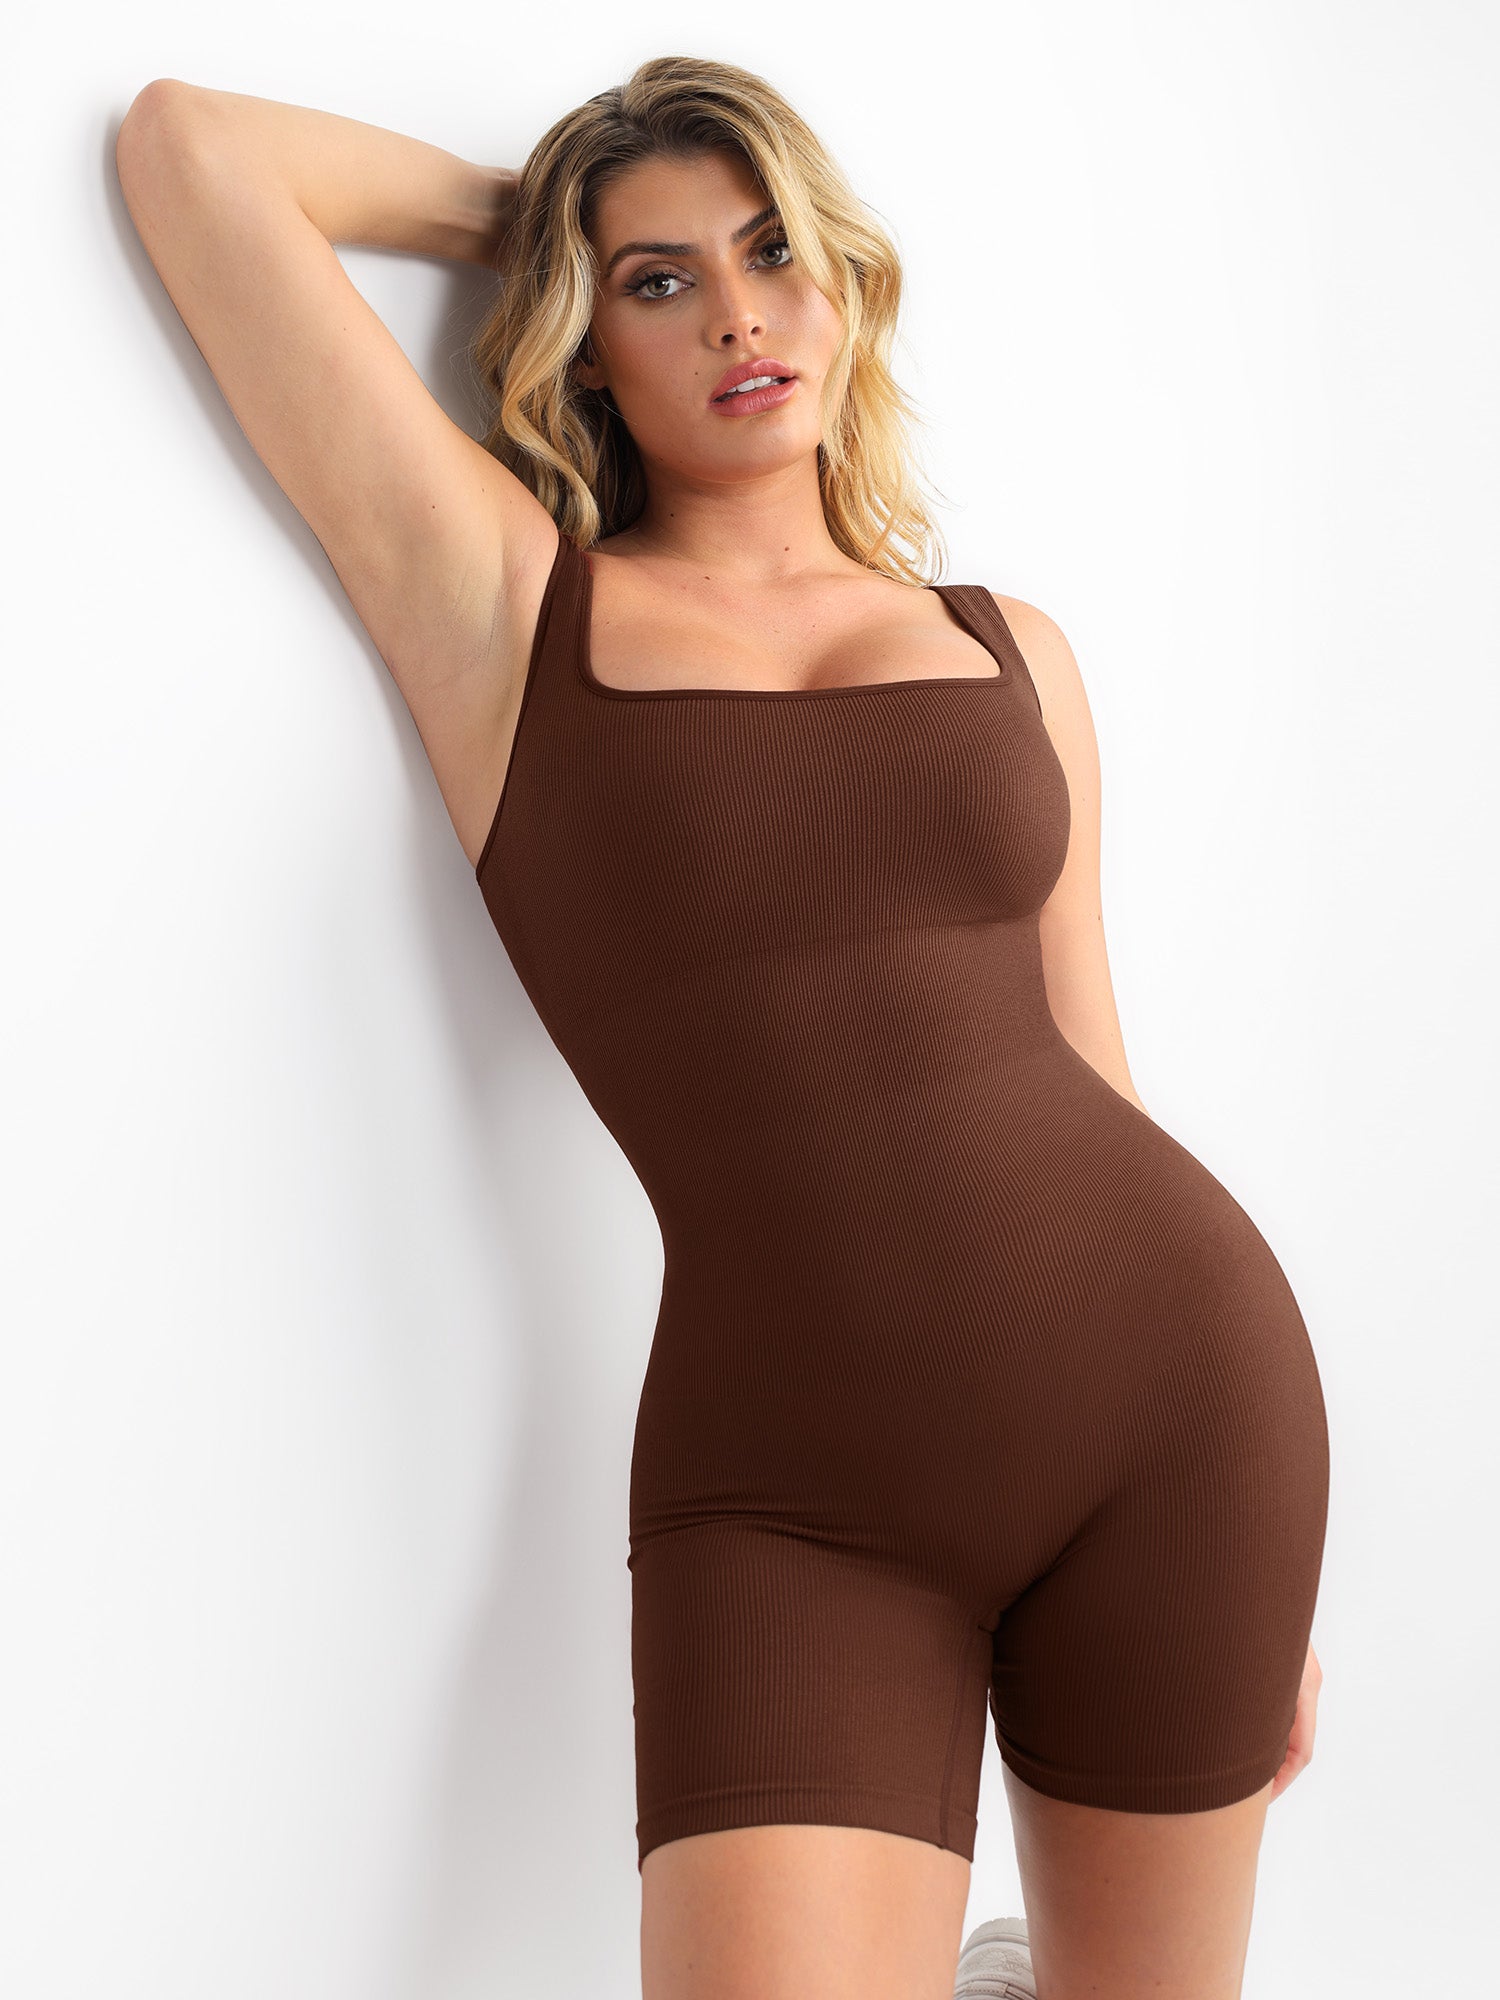 The Seamless Square Neck Sport Romper hits you at mid-thigh, offering targeted support to your upper leg muscles. This reduces muscle vibrations for a more comfortable and secure workout experience.